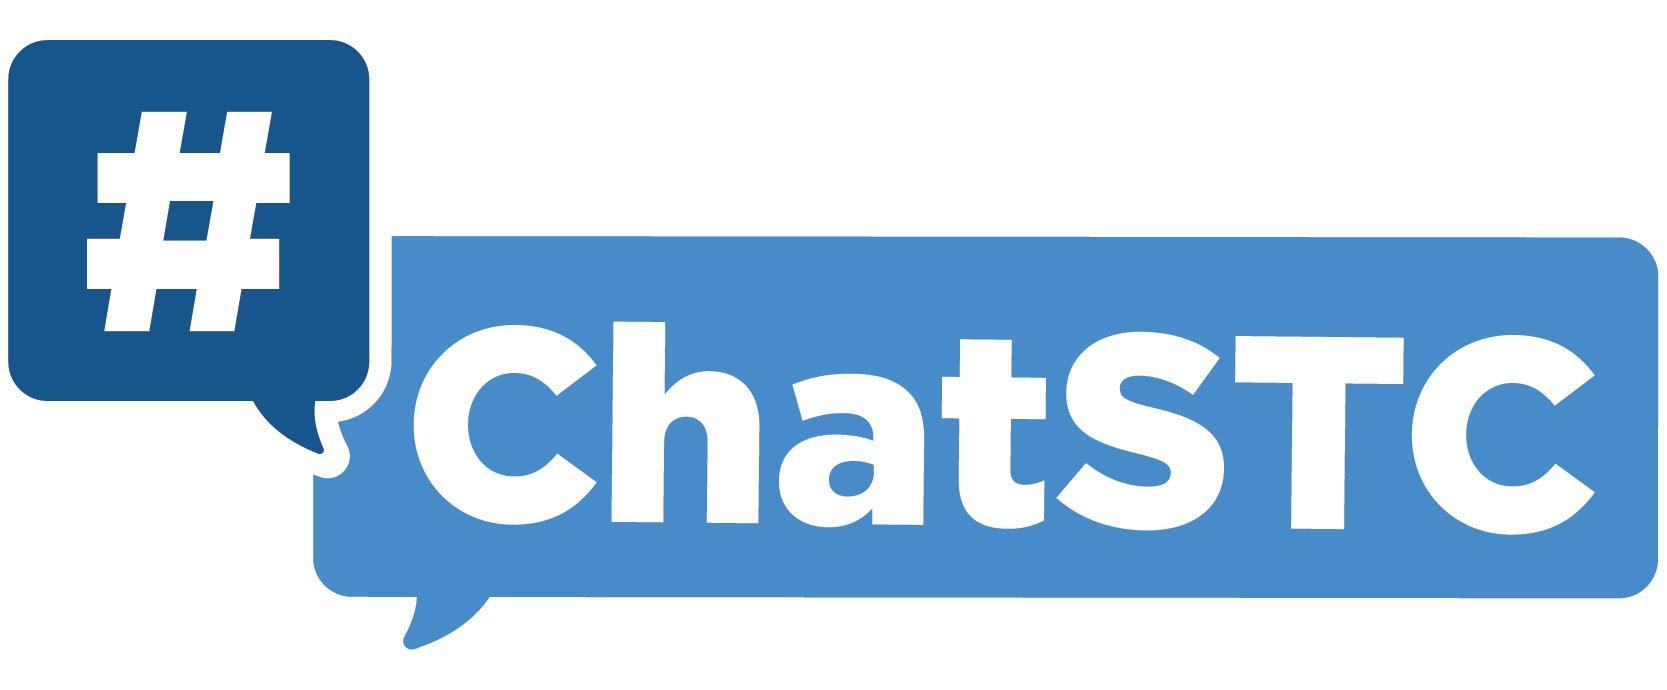 #ChatSTC Twitter Chat: Building Cyber Resilience in Critical Infrastructure